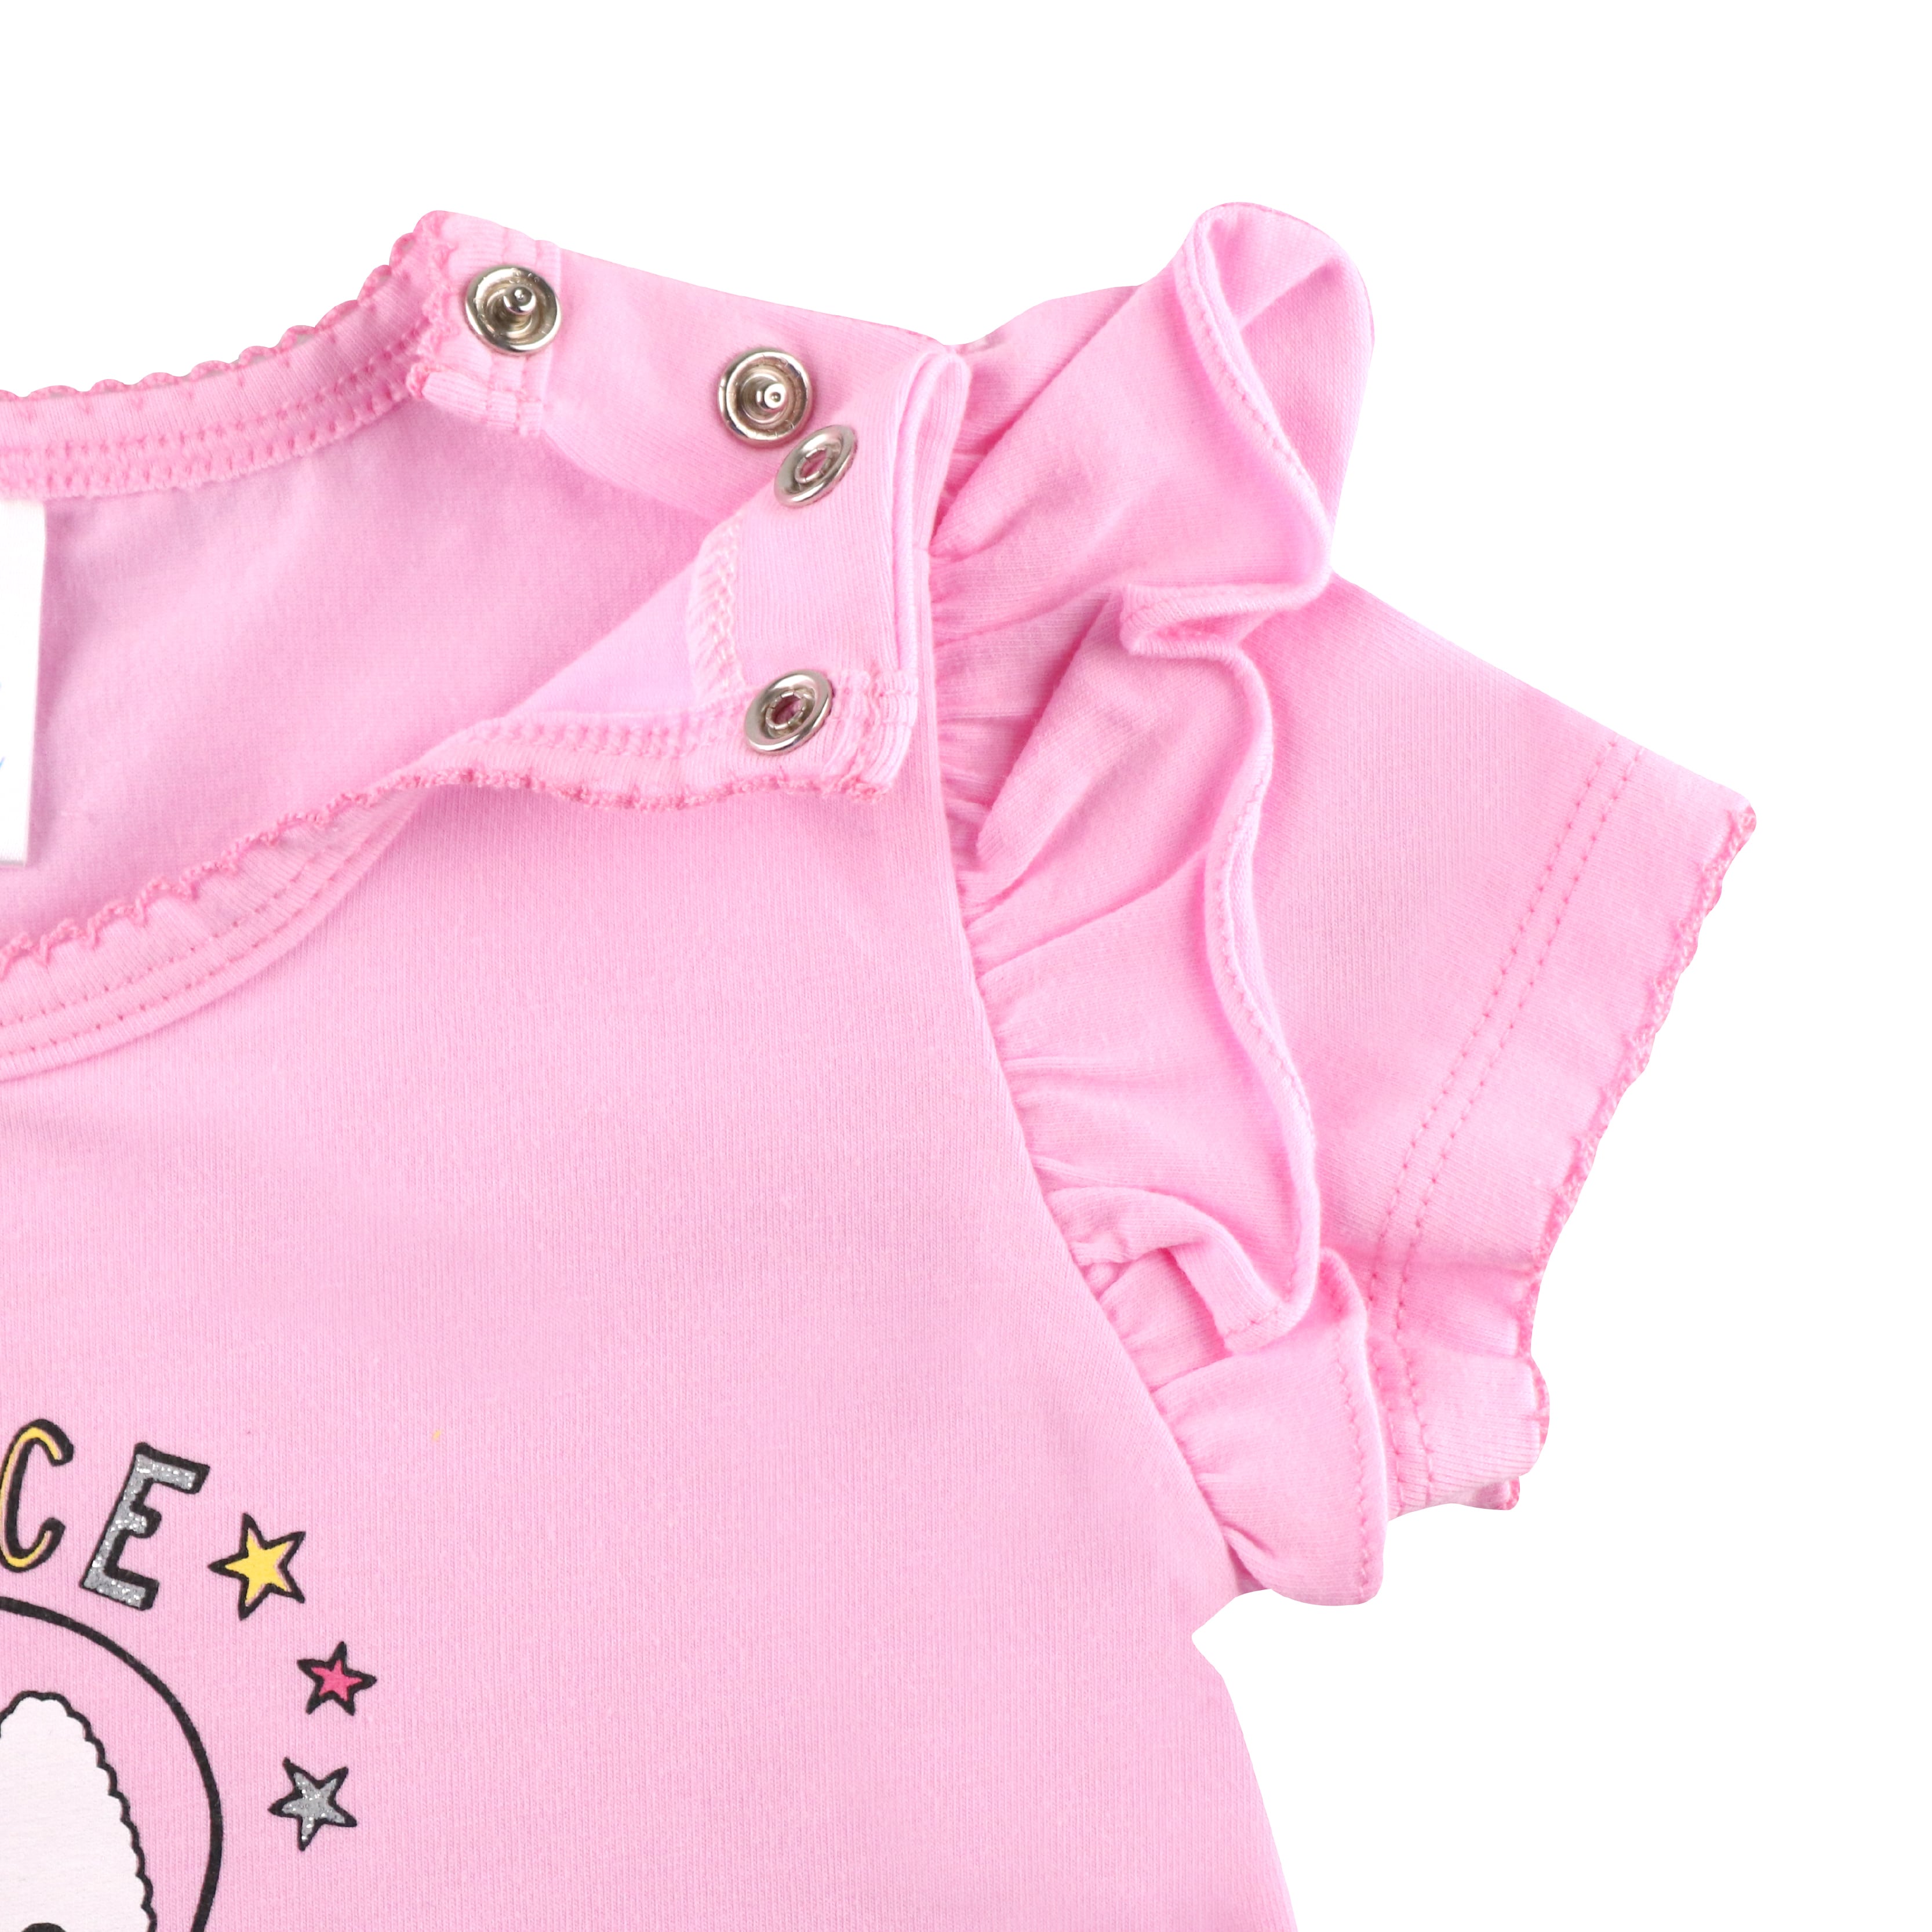 FIFFY PLANET SERIES BABY GIRL ROMPER SUIT